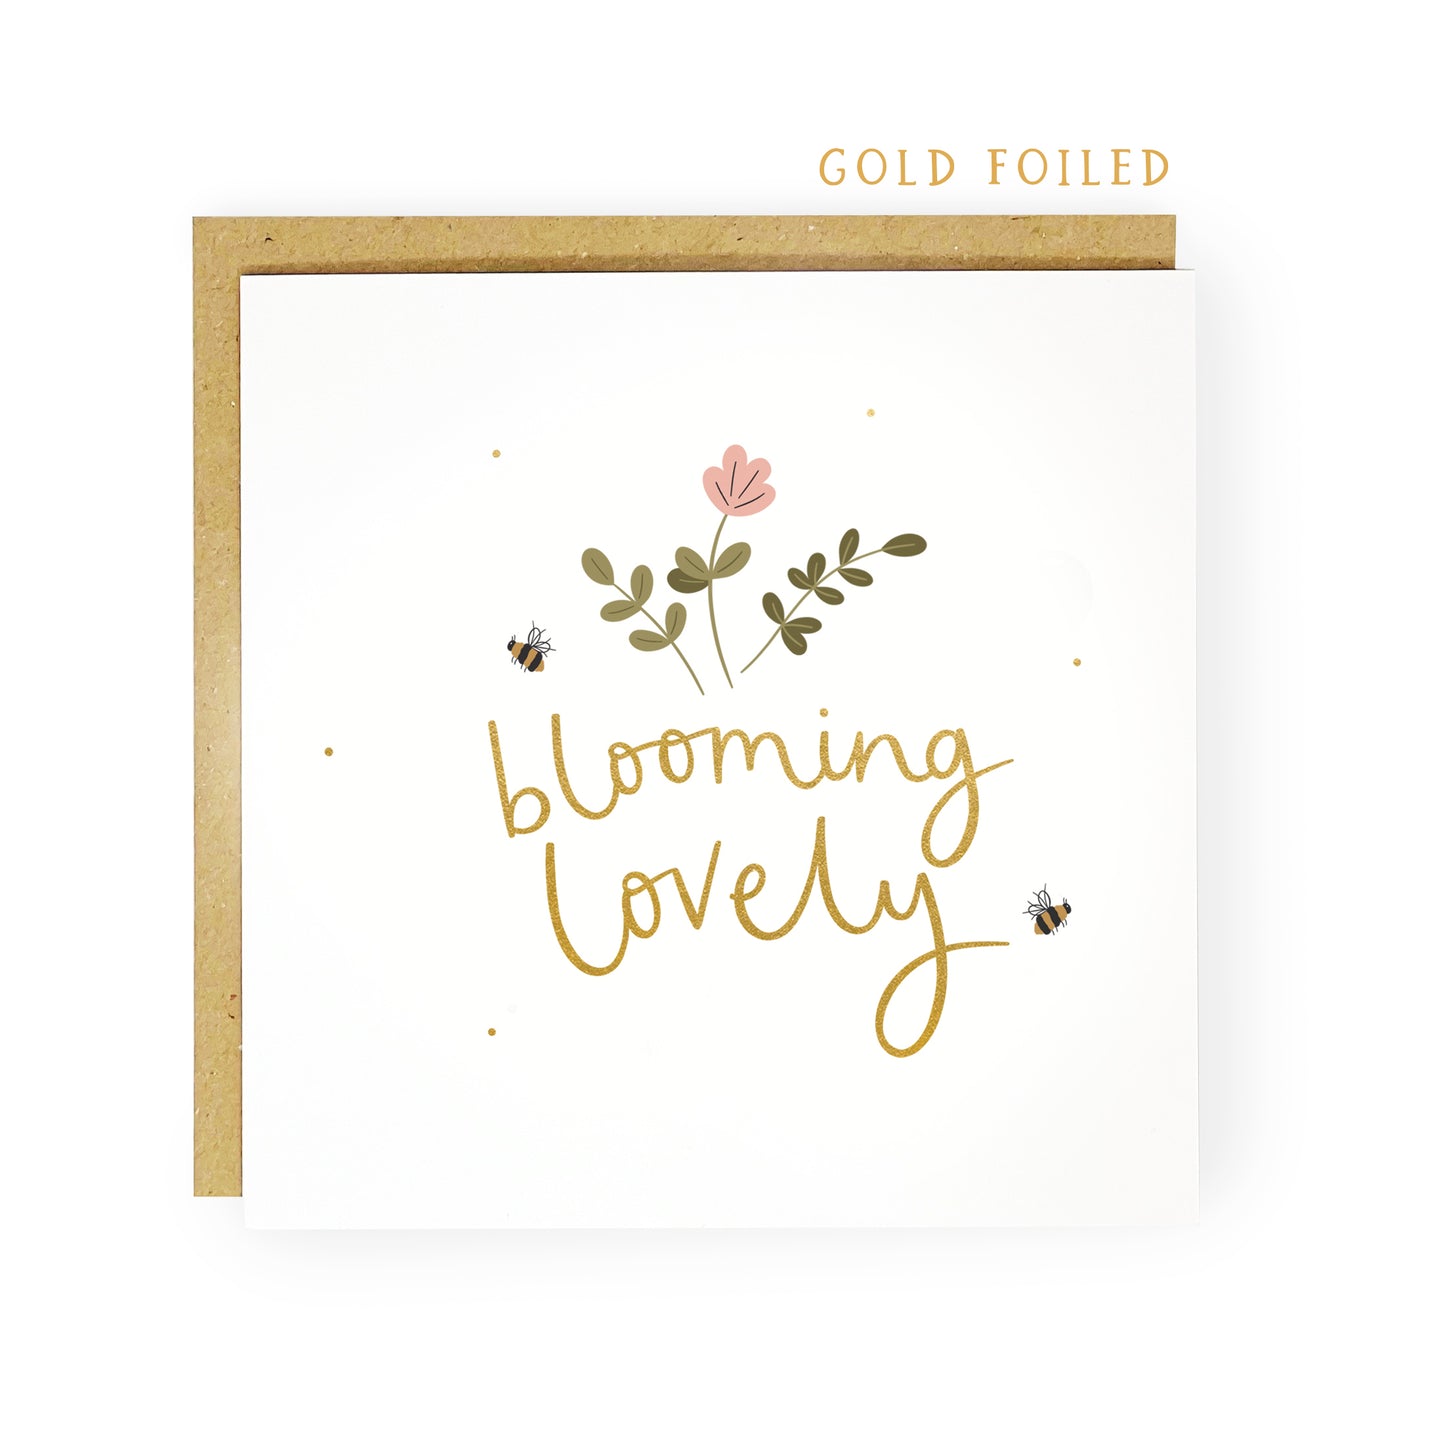 blooming lovely gold foiled love card by Abbie Imagine